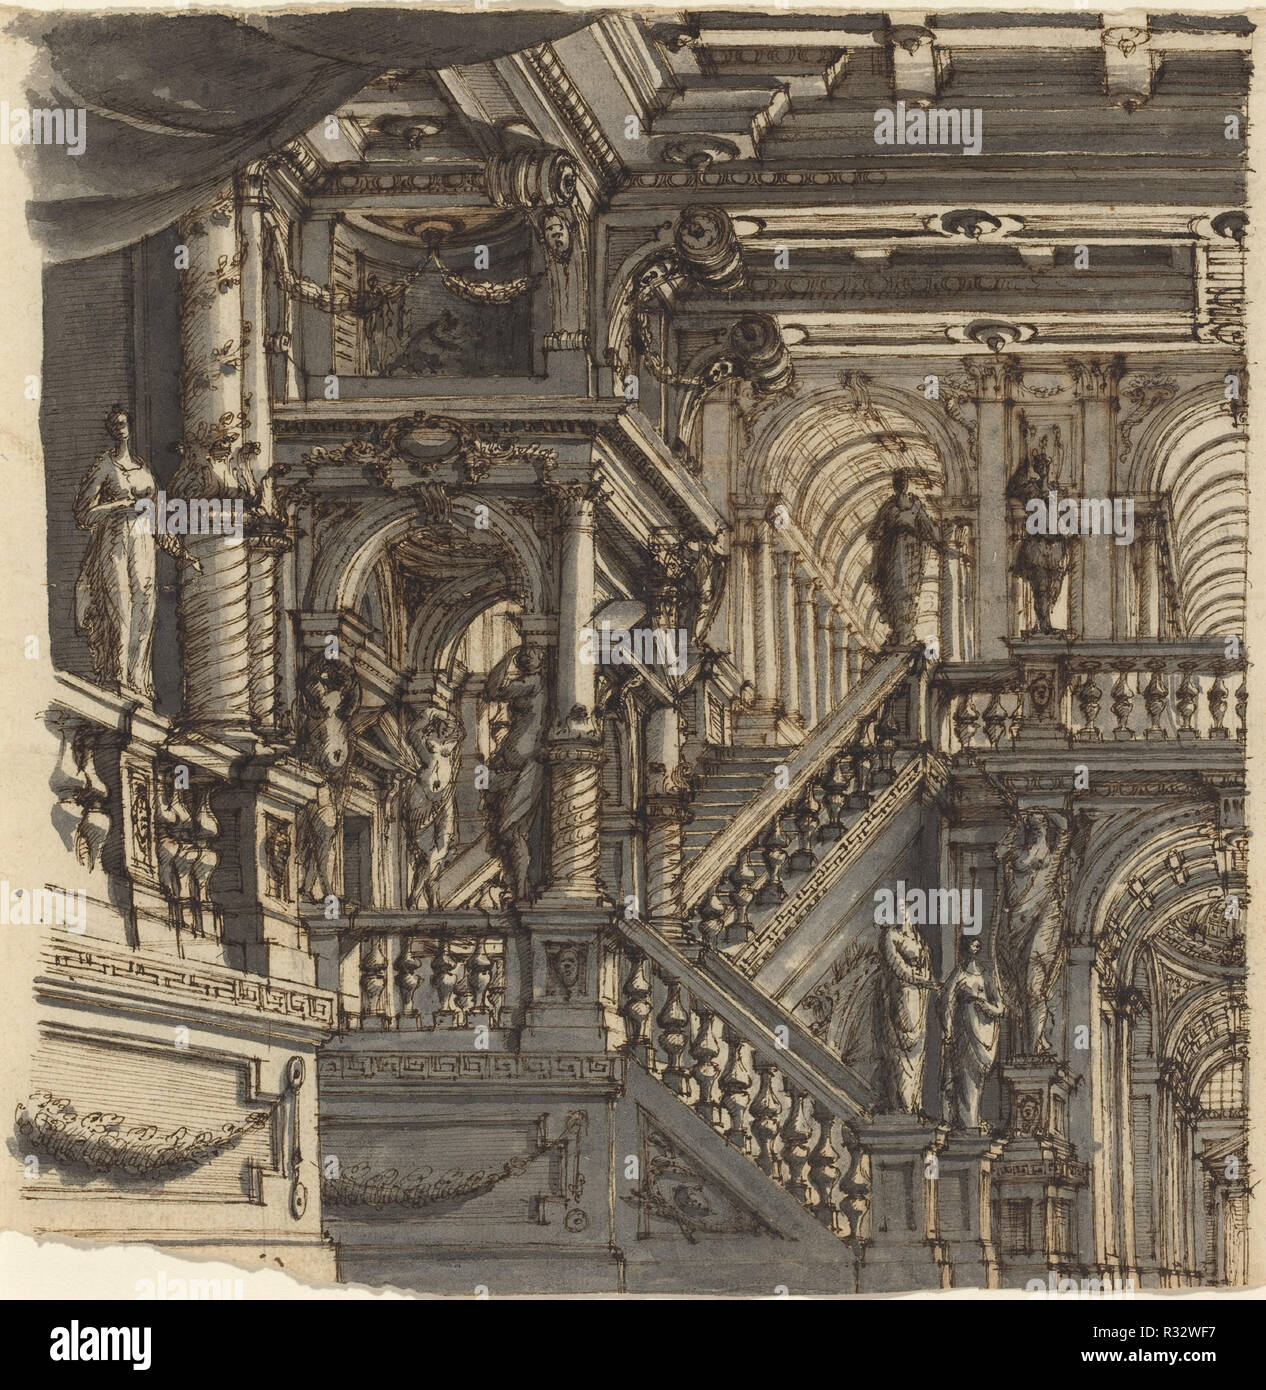 An Elaborate Staircase in a Palace. Dimensions: overall (approximate): 20.8 x 29.3 cm (8 3/16 x 11 9/16 in.). Medium: pen and brown ink with gray wash. Museum: National Gallery of Art, Washington DC. Author: Bibiena (family member). Stock Photo